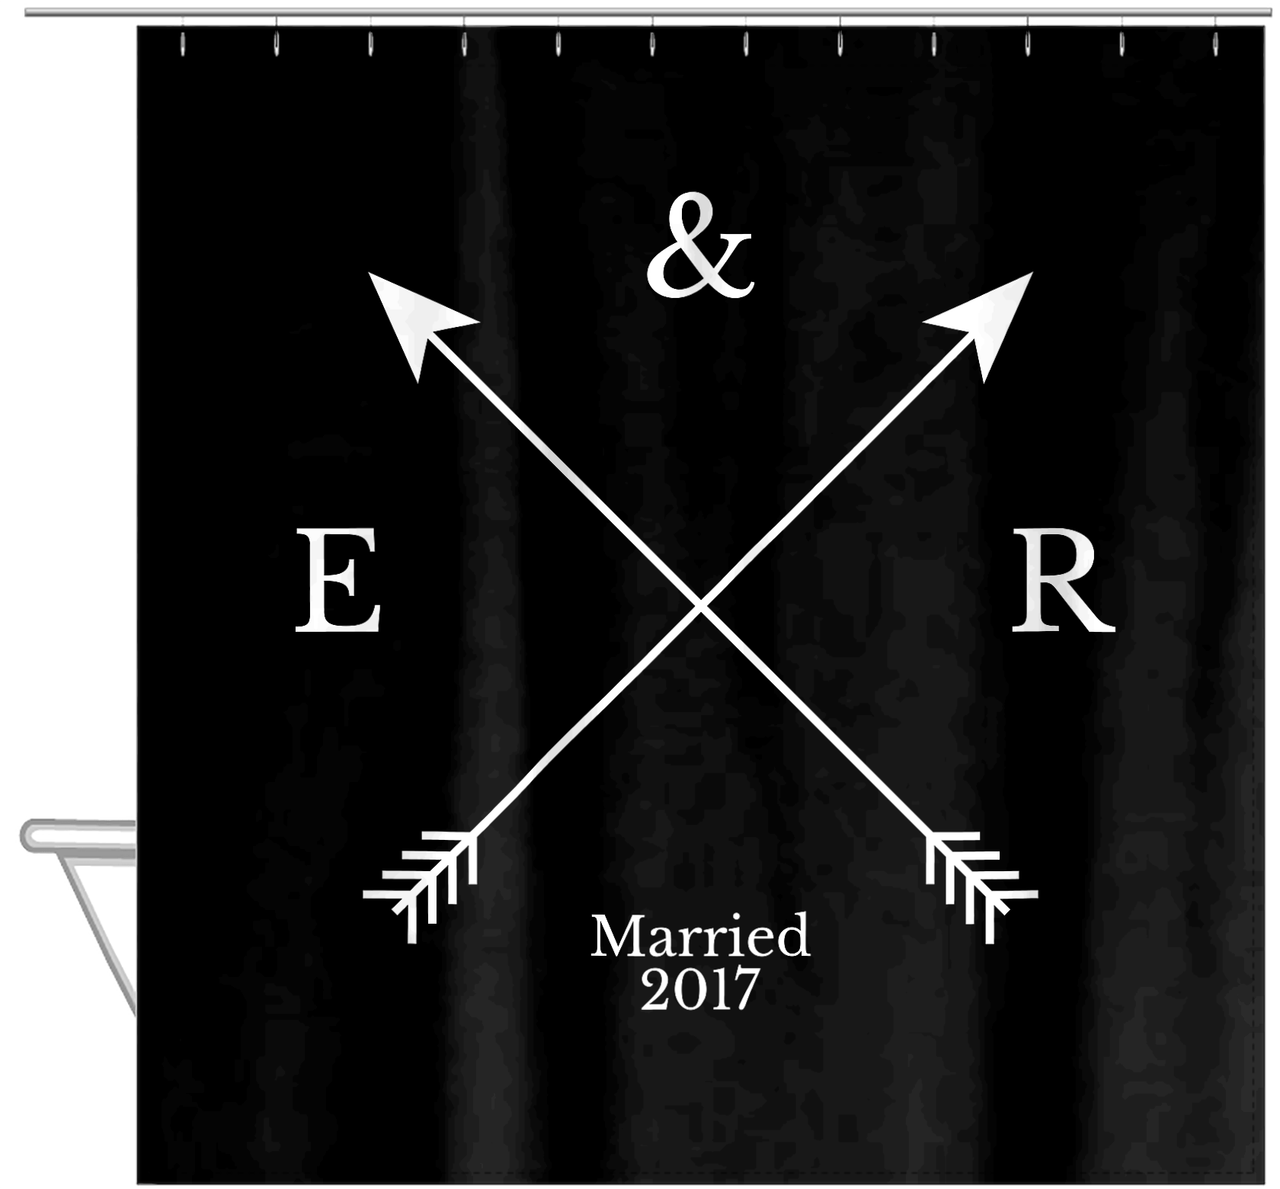 Personalized Arrows Shower Curtain - Black and White - Couple Initials with Wedding Year - Hanging View